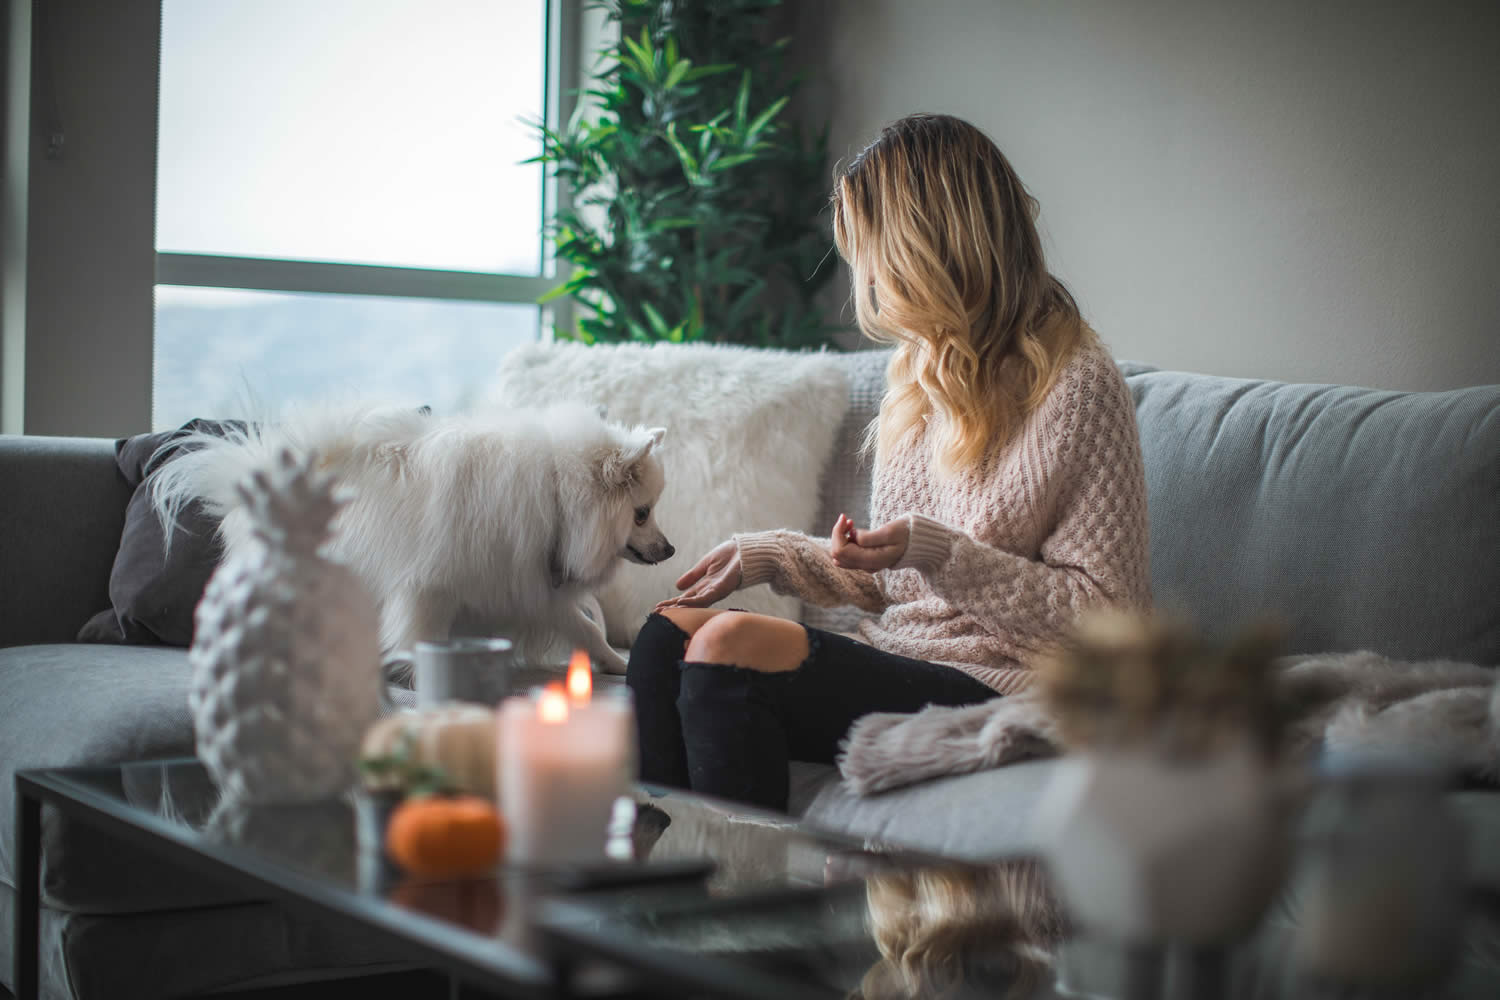 A woman sitting on a sofa with her dog and candles on the table